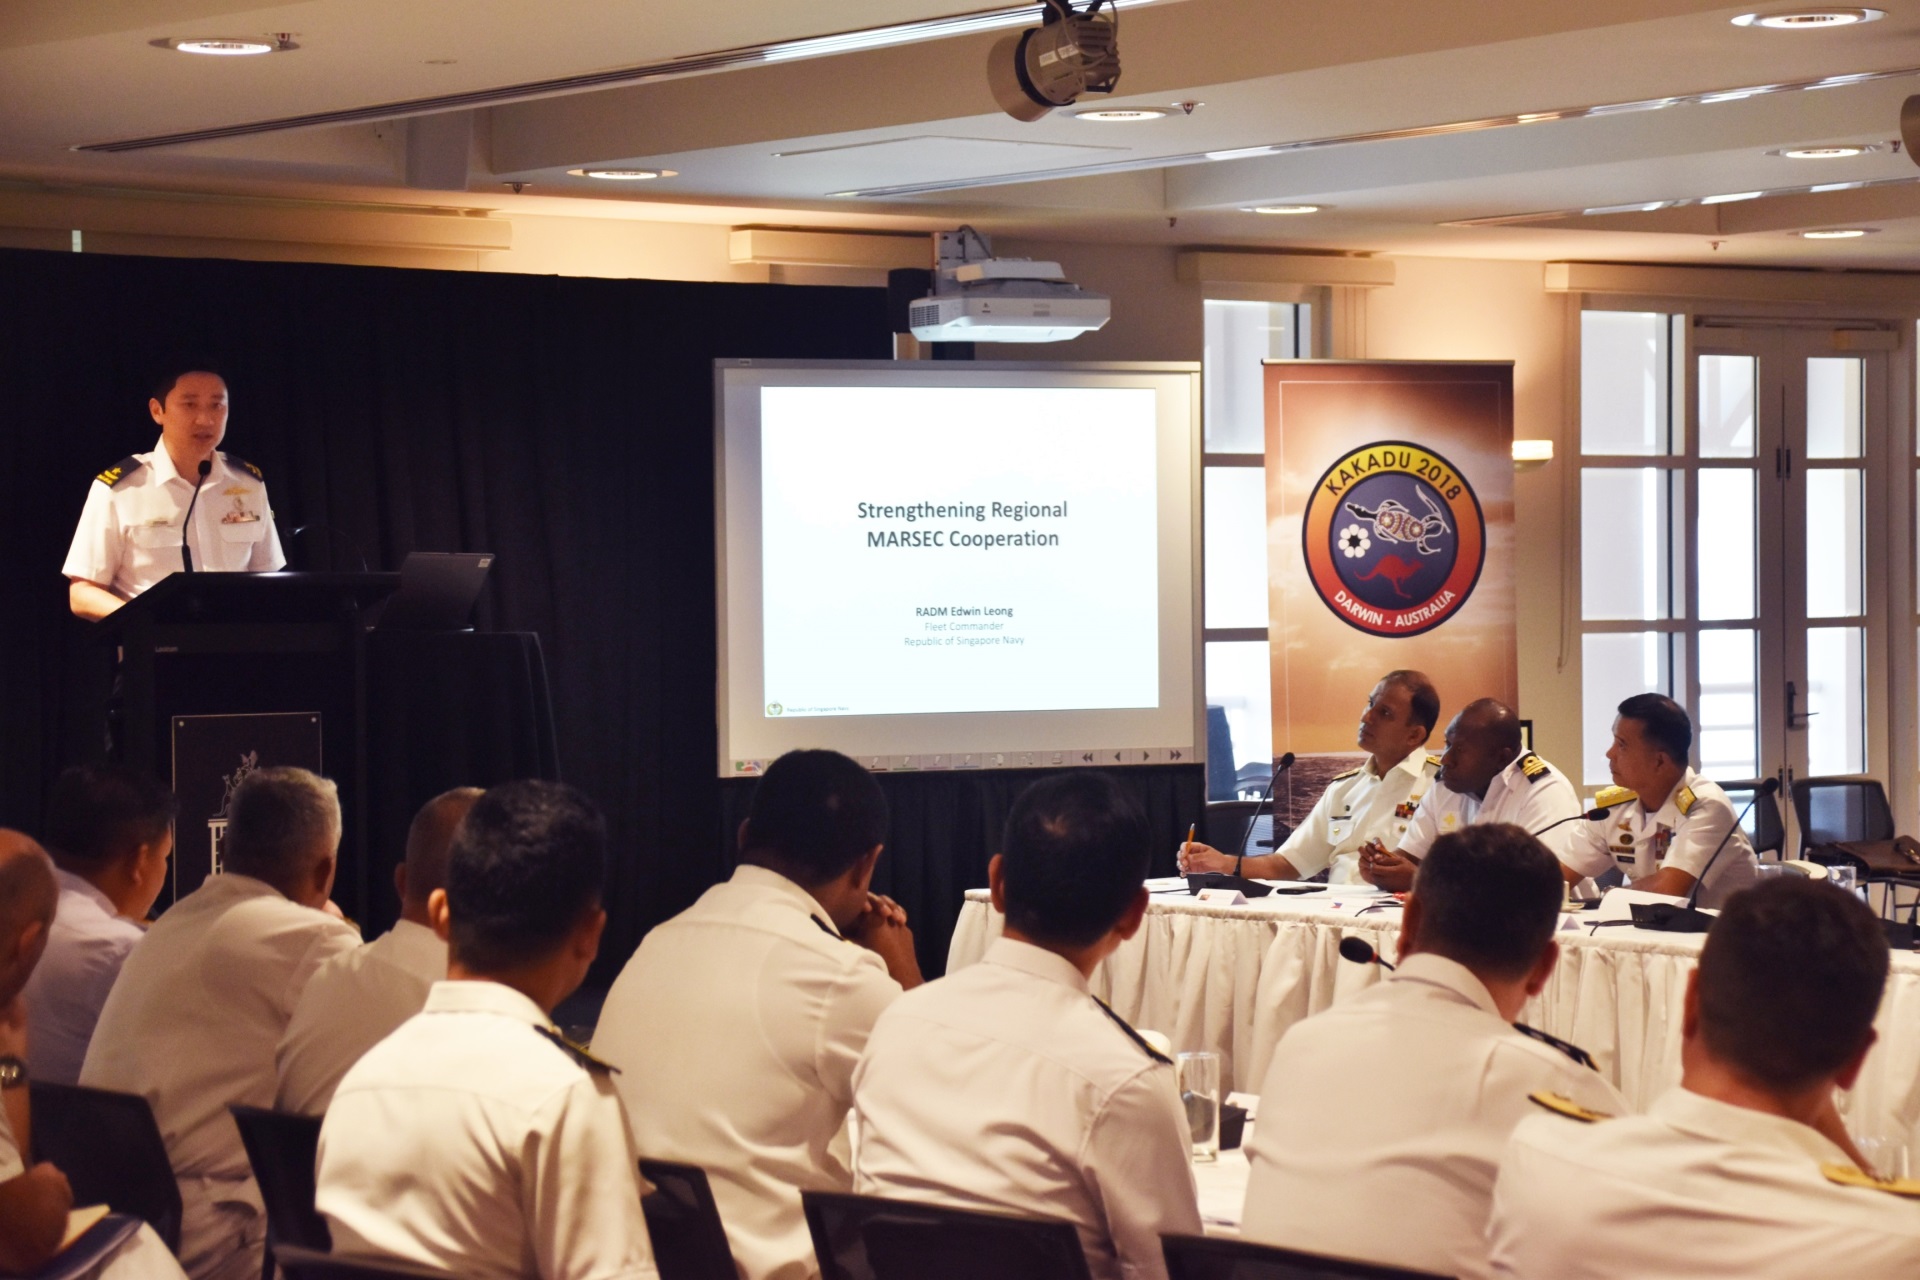 RSN Fleet Commander Rear-Admiral (RADM) Edwin Leong sharing best practices for strengthening regional cooperation in the maritime domain during the Fleet Commanders' Conference on 1 September 2018.